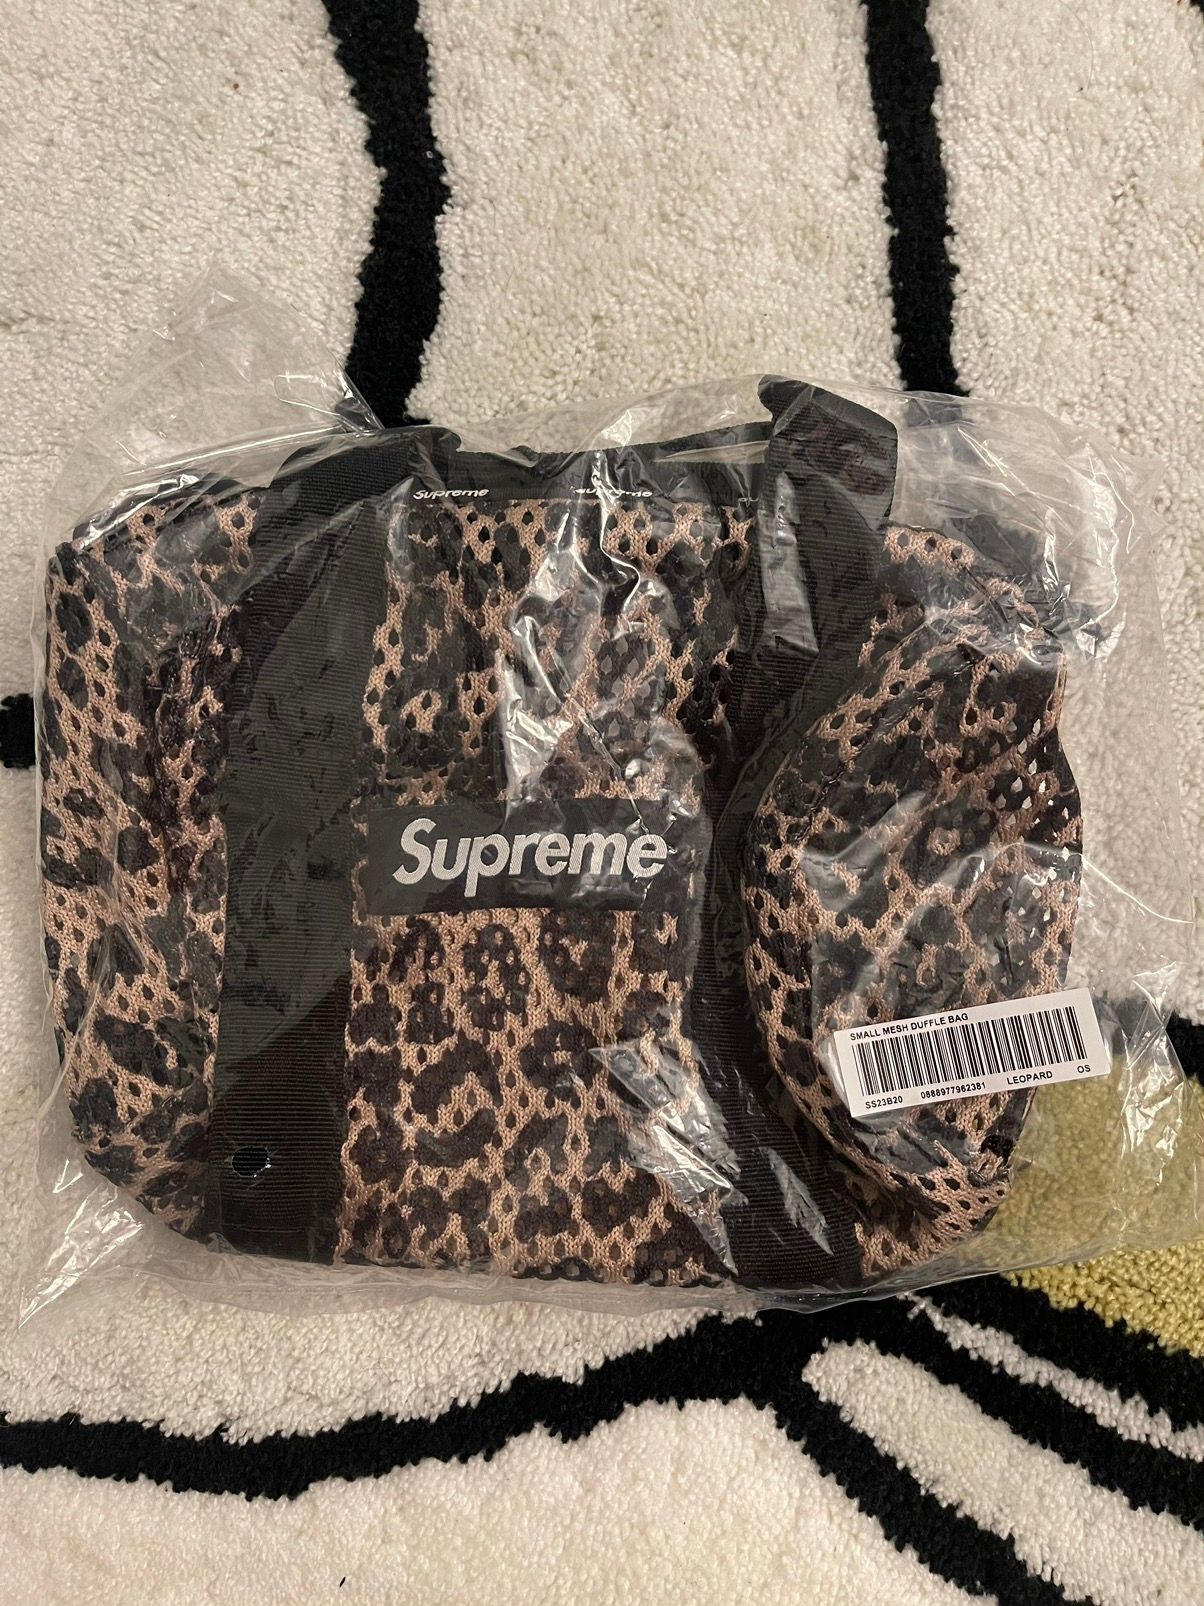 DropsByJay on X: Supreme Mesh Bags These 4 different mesh bags are set to  release in store and online this Thursday, May 18th. Mesh Mini Duffle Bag,  Mesh Small Backpack, Mesh Duffle